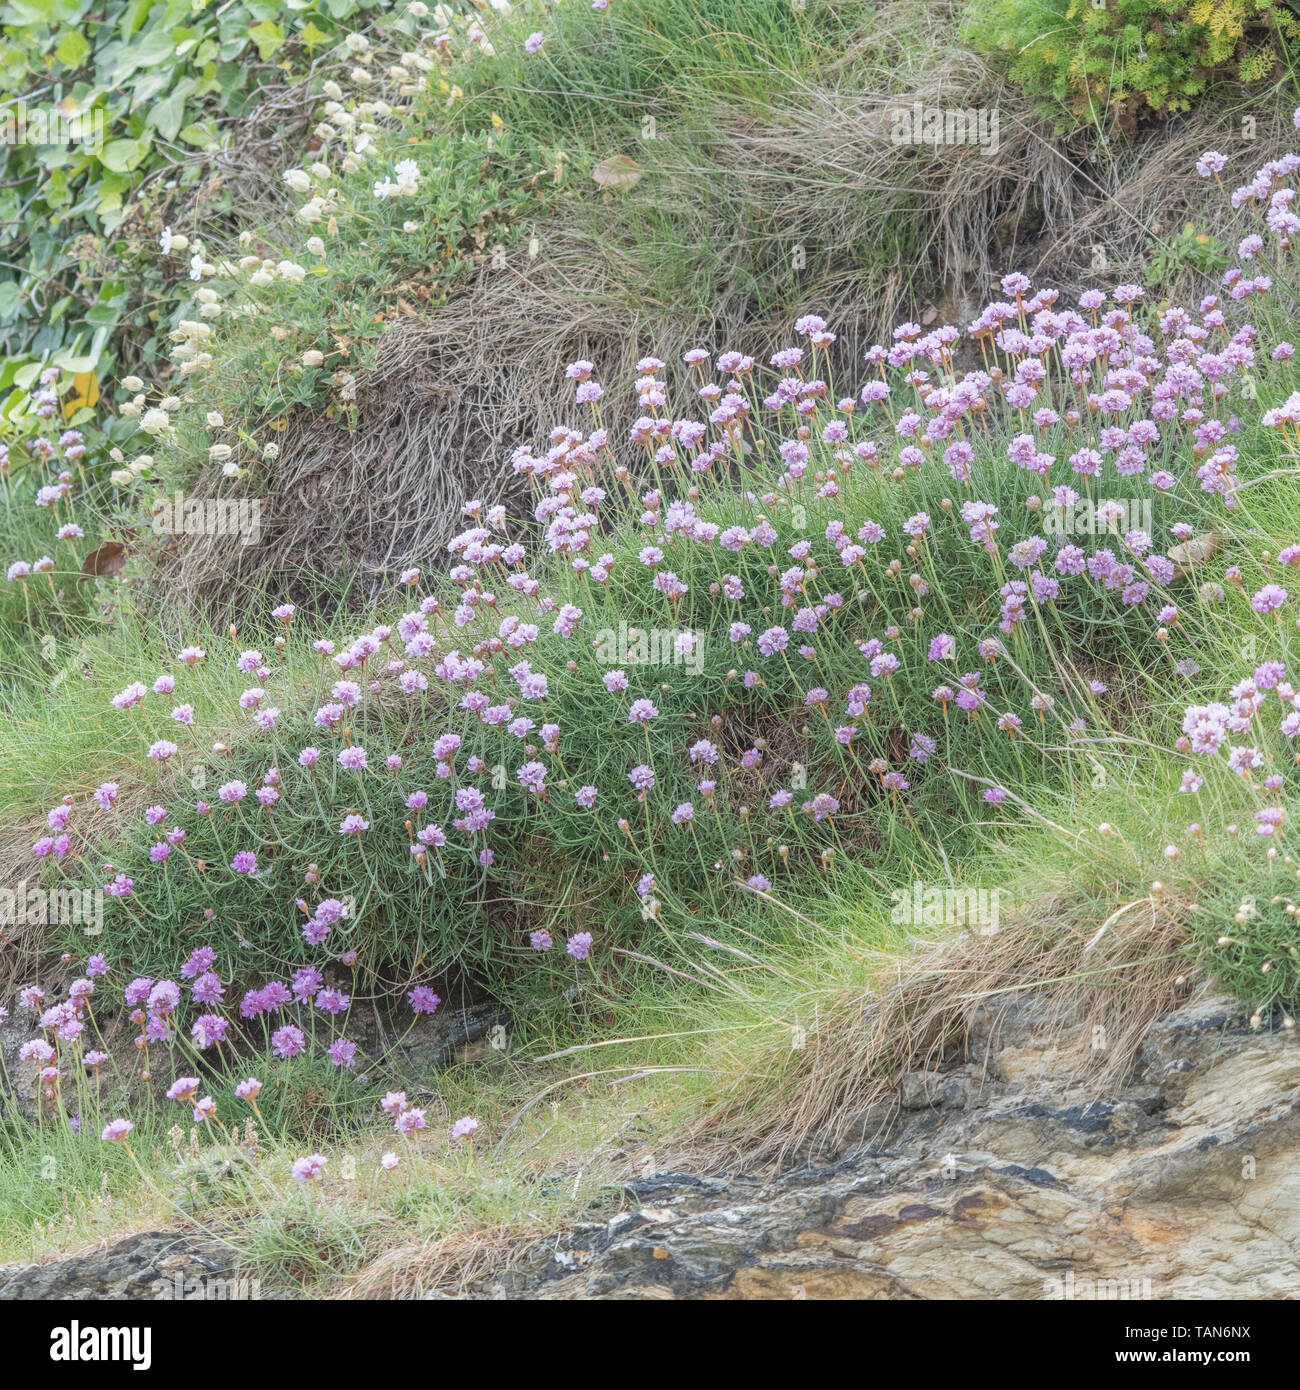 Clustered pink flowers of Thrift / Sea Pink - Armeria maritima - on rock outcrop. Common UK seashore & coastal plant. Wild flower patch. Stock Photo